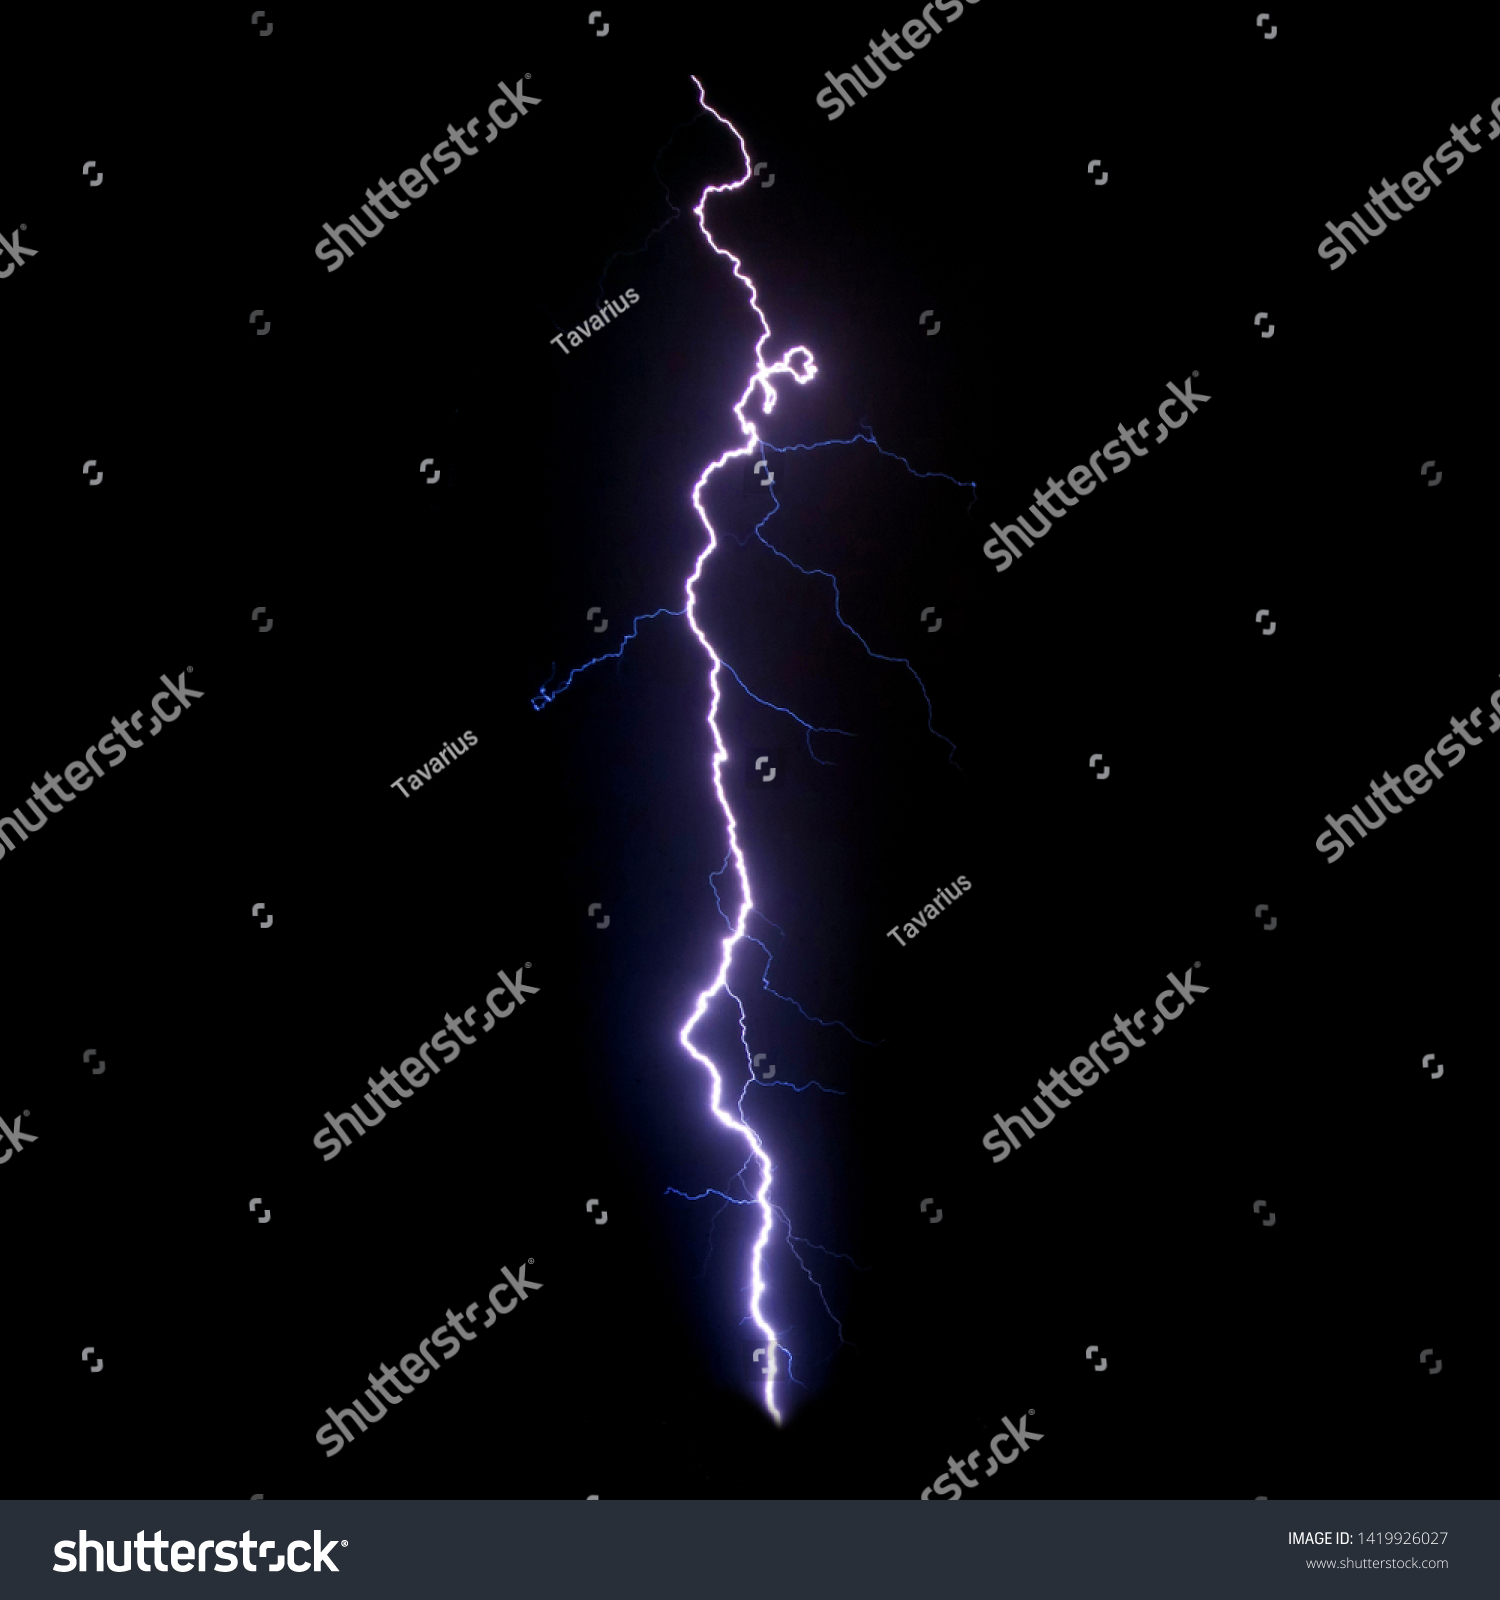 Realistic lightning isolated on black background for design element. Electricity. Natural light effect, bright glowing. #1419926027